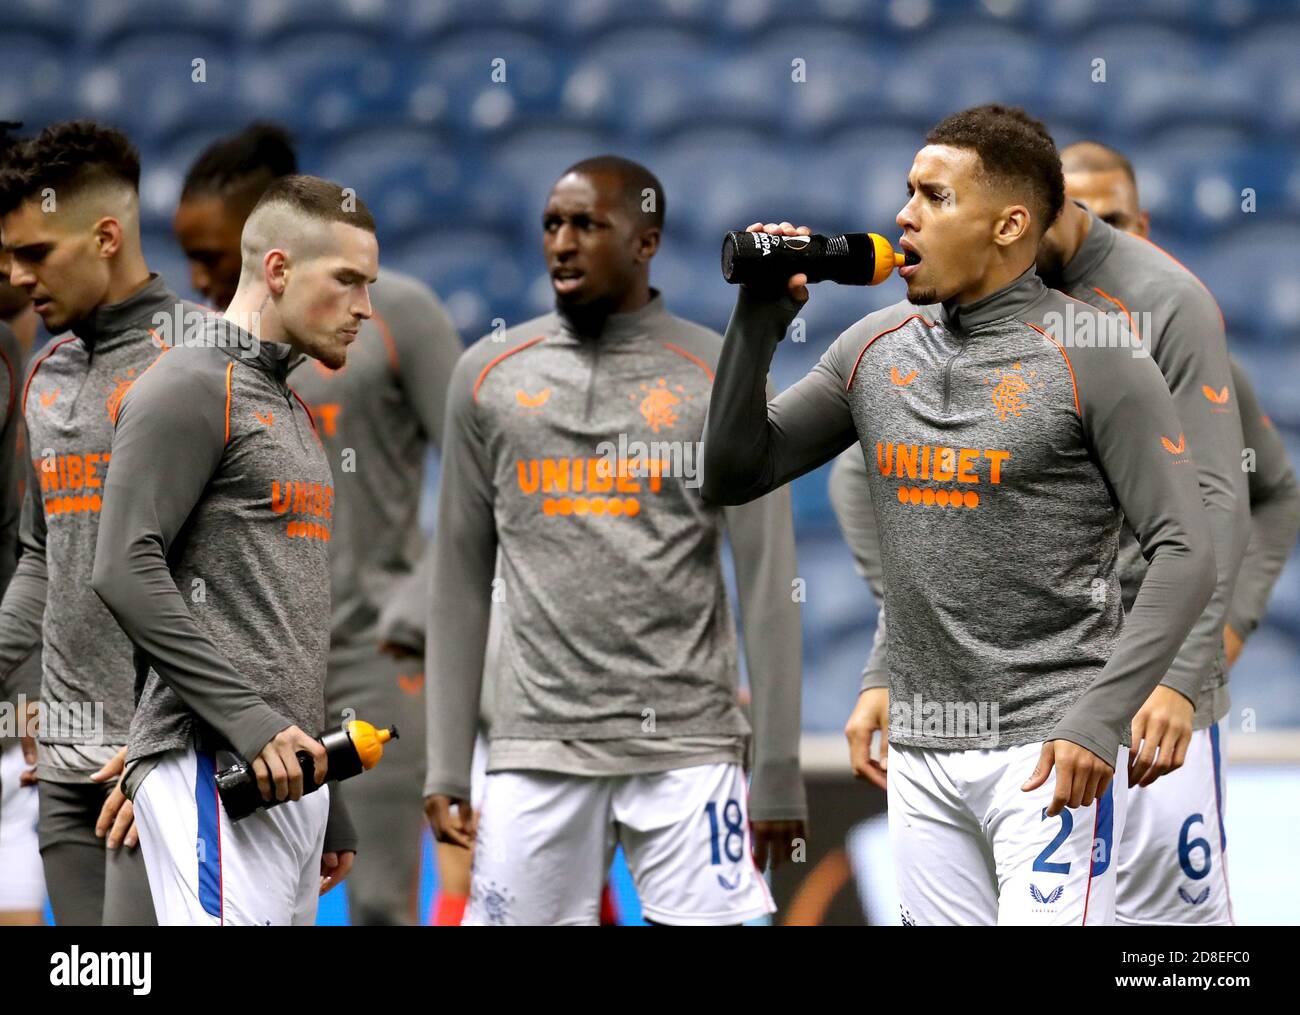 Rangers' James Tavernier (right) takes a drinks break as he warms up on the pitch prior to the beginning of the UEFA Europa League match at Ibrox Stadium, Glasgow. Stock Photo